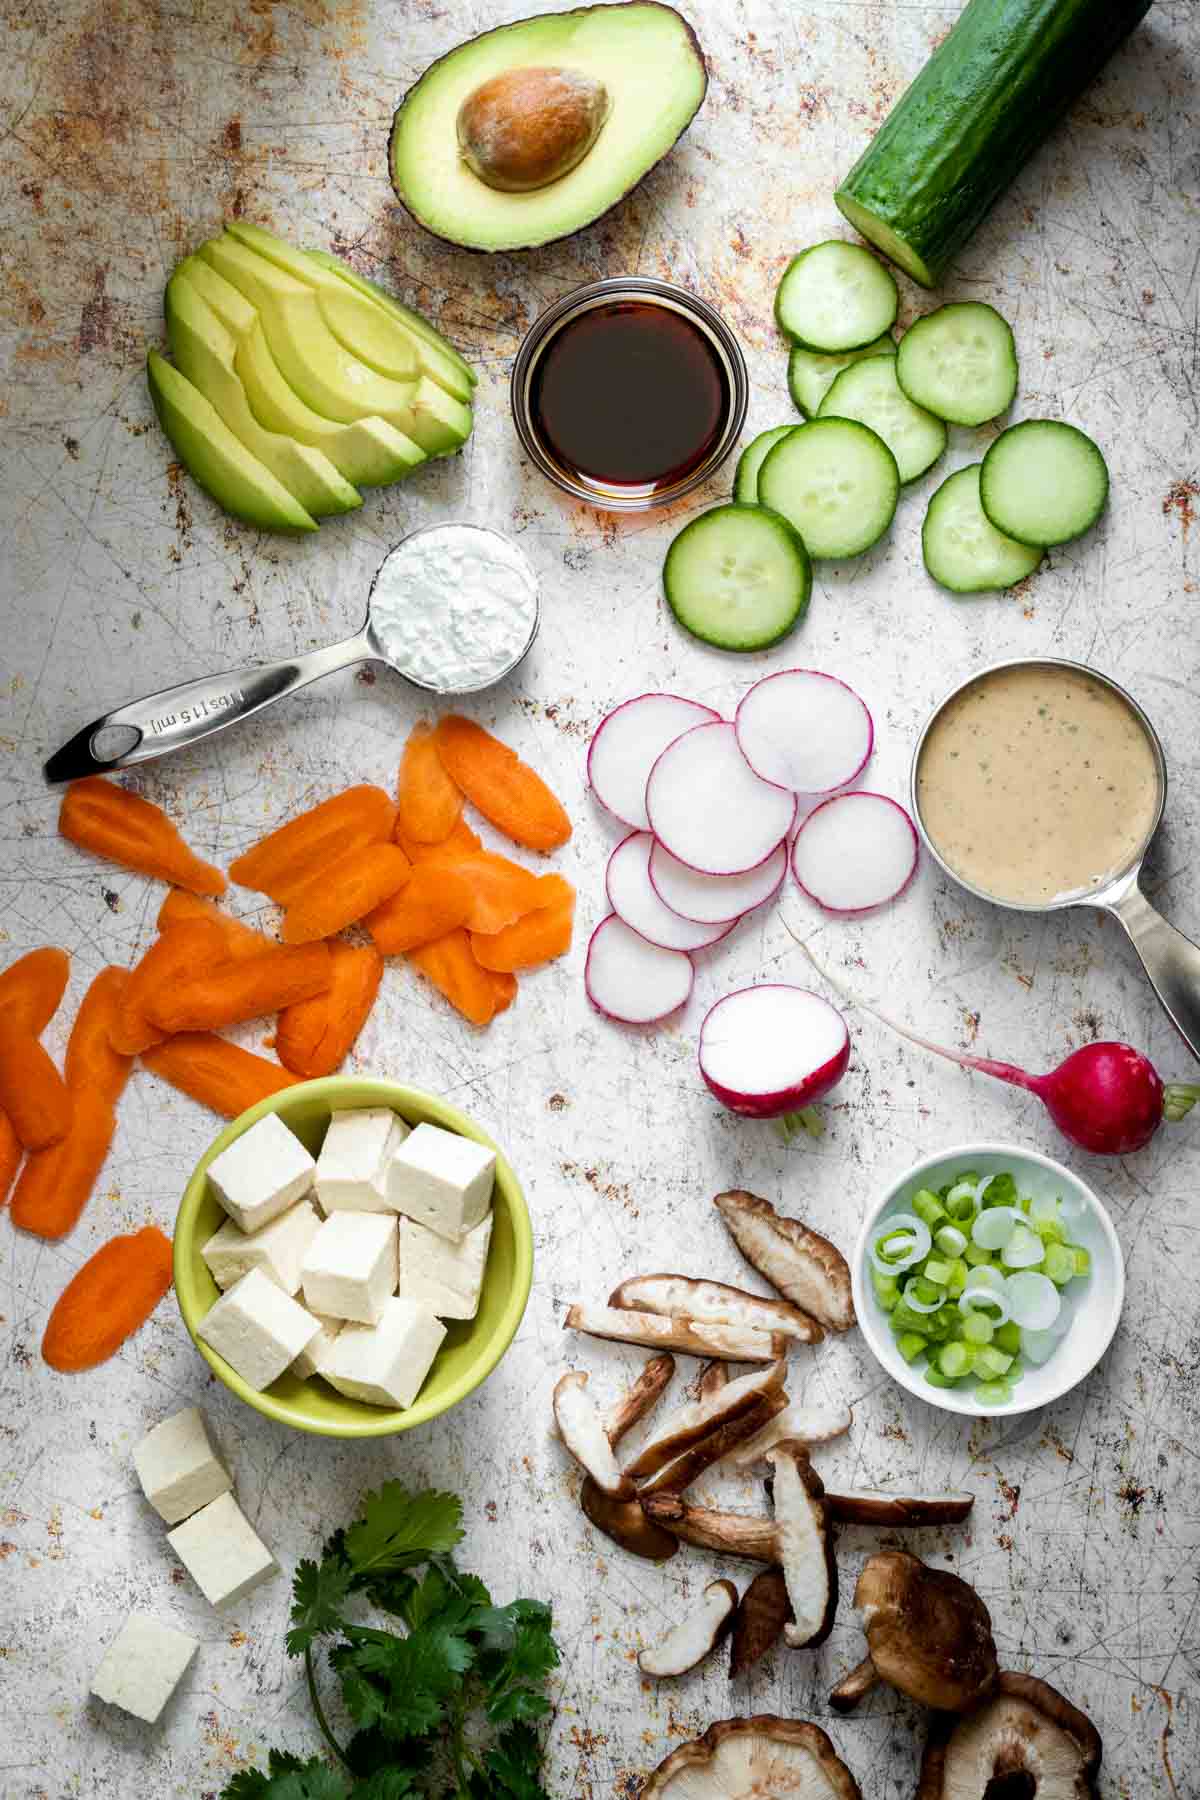 A variety of vegetables and toppings to make a homemade sushi bowl laying on a white surface with brown specks